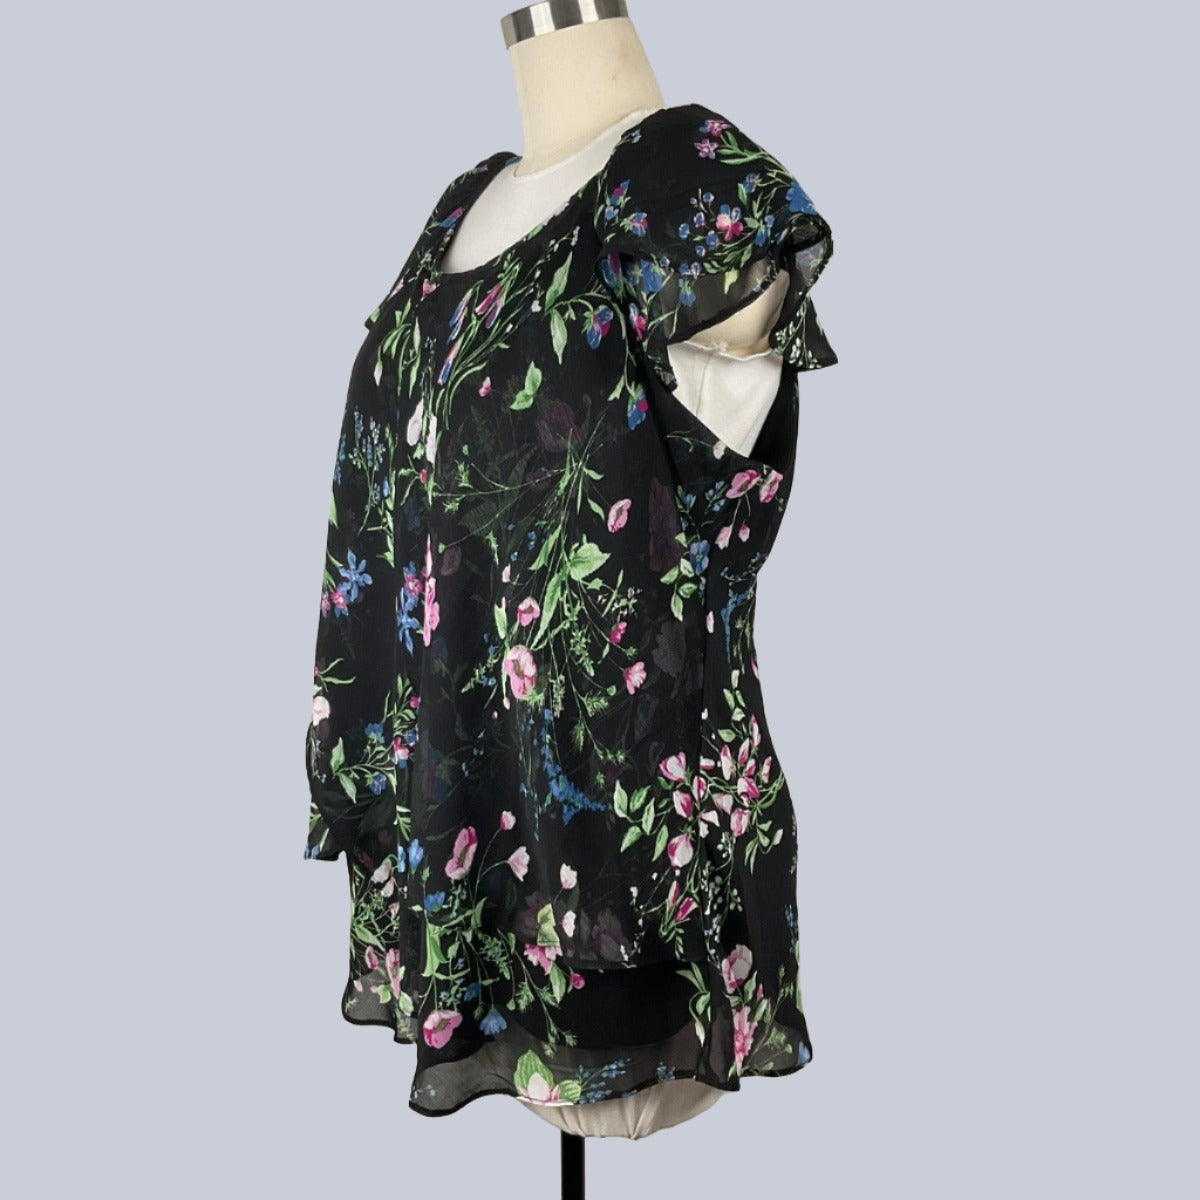 Women's Black Floral Blouse Size 2X - Right Side View